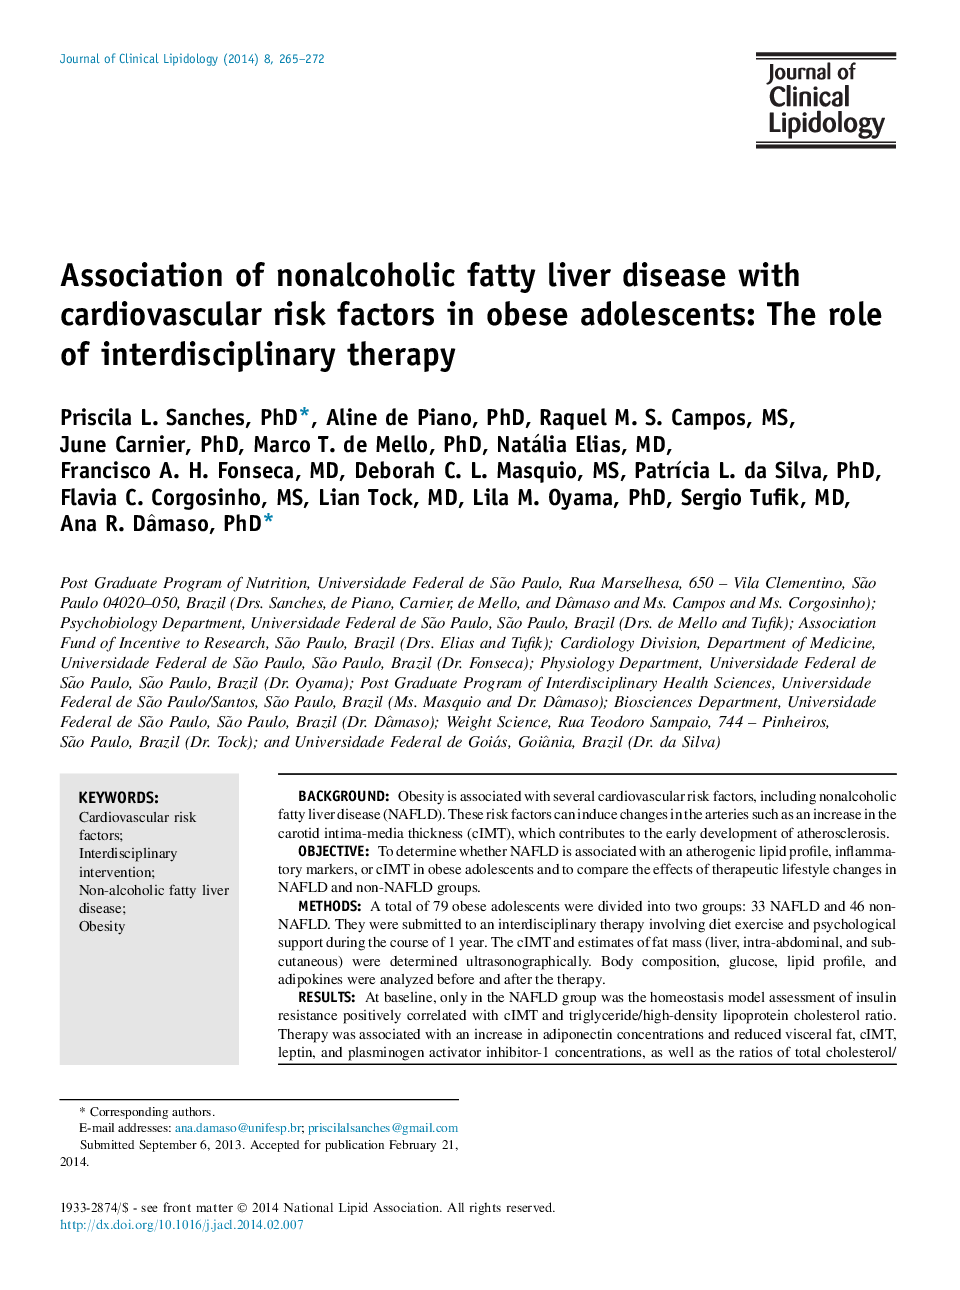 Association of nonalcoholic fatty liver disease with cardiovascular risk factors in obese adolescents: The role of interdisciplinary therapy